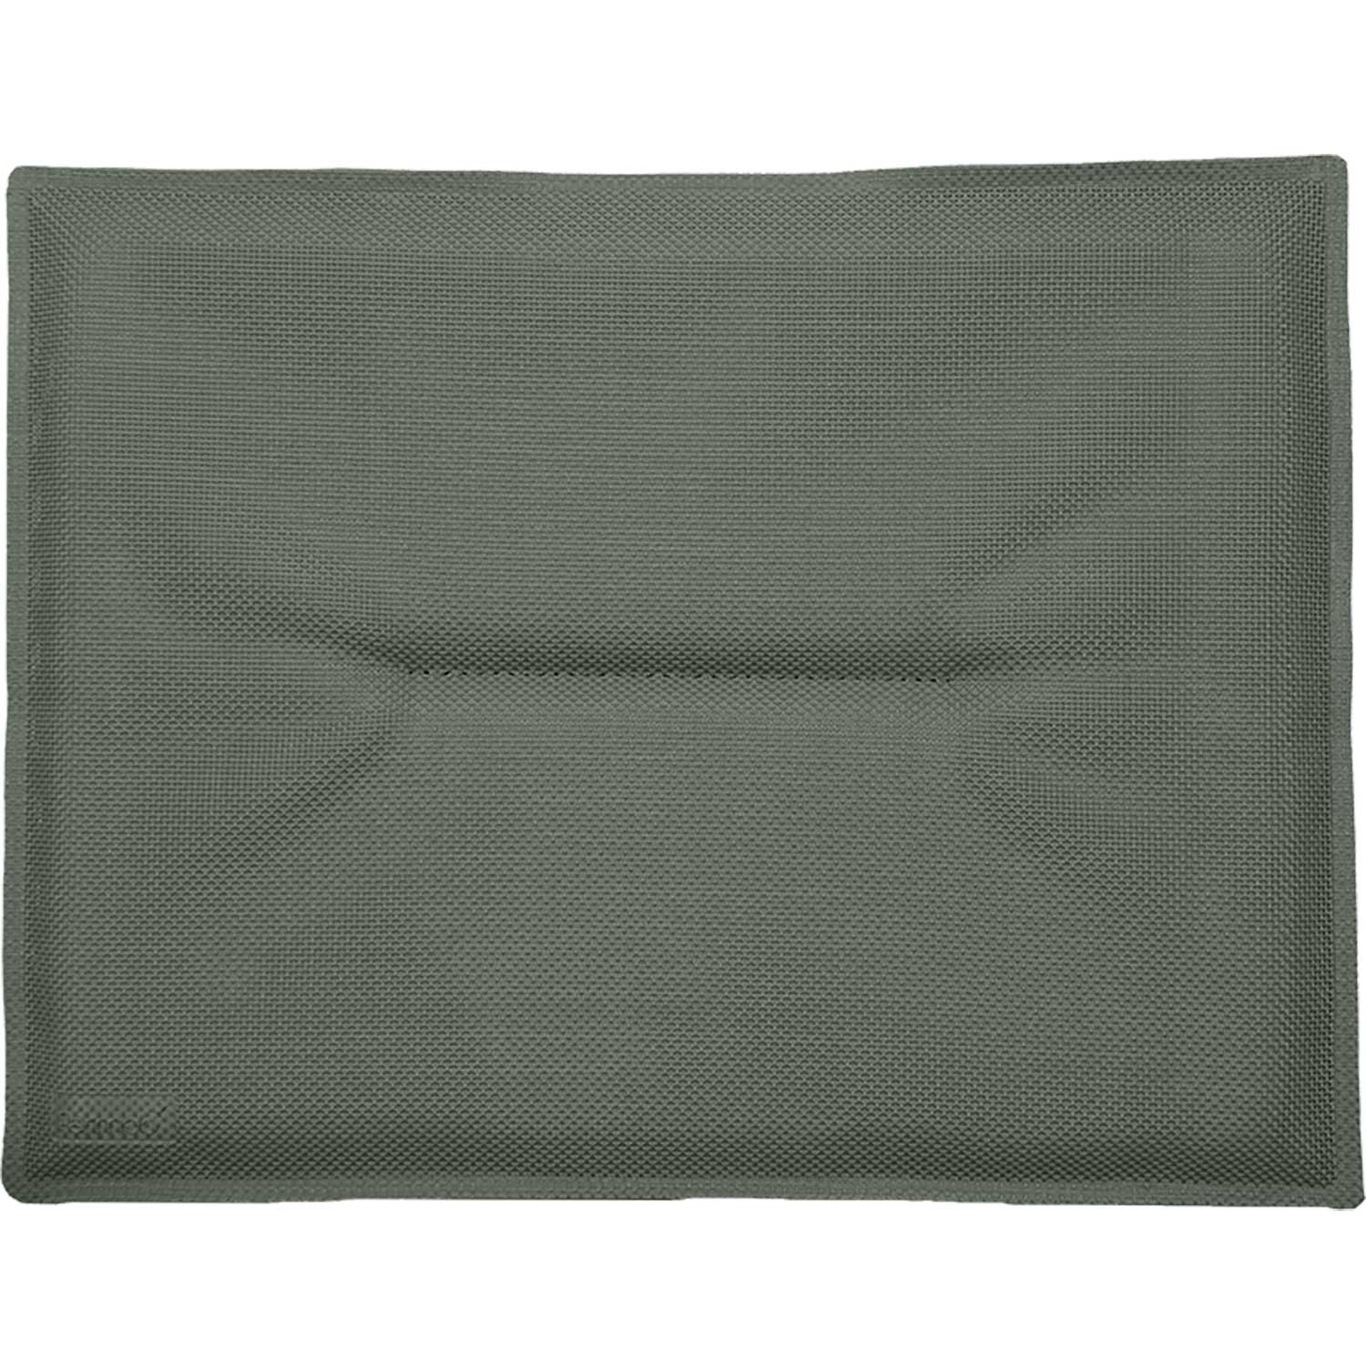 Bistro Outdoor Cushion, Rosemary